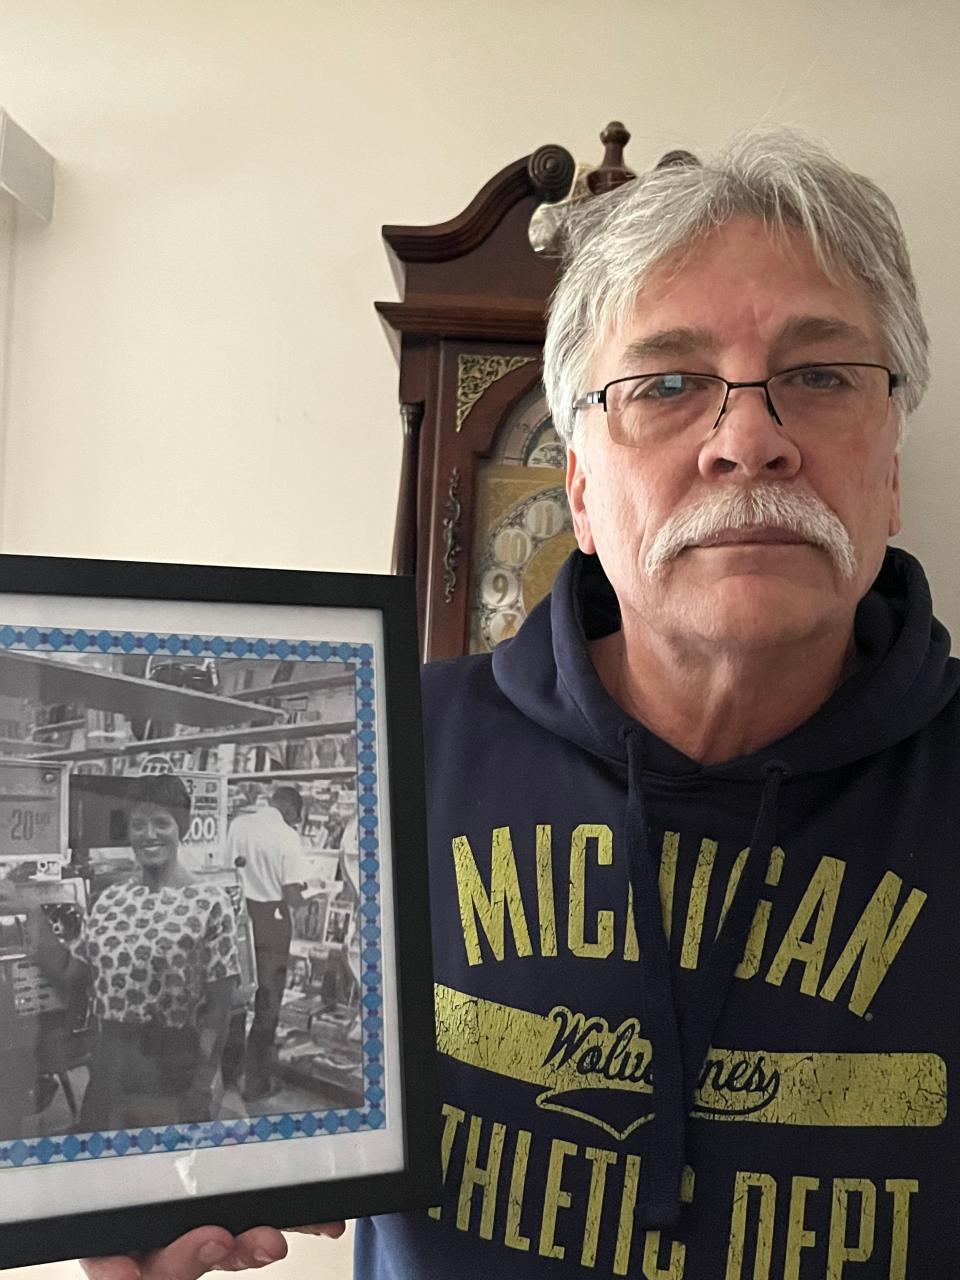 Richard Hanchett of Waterford, MIchigan, holds of photograph of his mother, Ruth Marie Terry, whose body was found nearly 50 years ago in the dunes of Provincetown, Massachusetts. The unsolved homicide case, with the unidentified victim, was known for years as the "Lady of the Dunes" case.